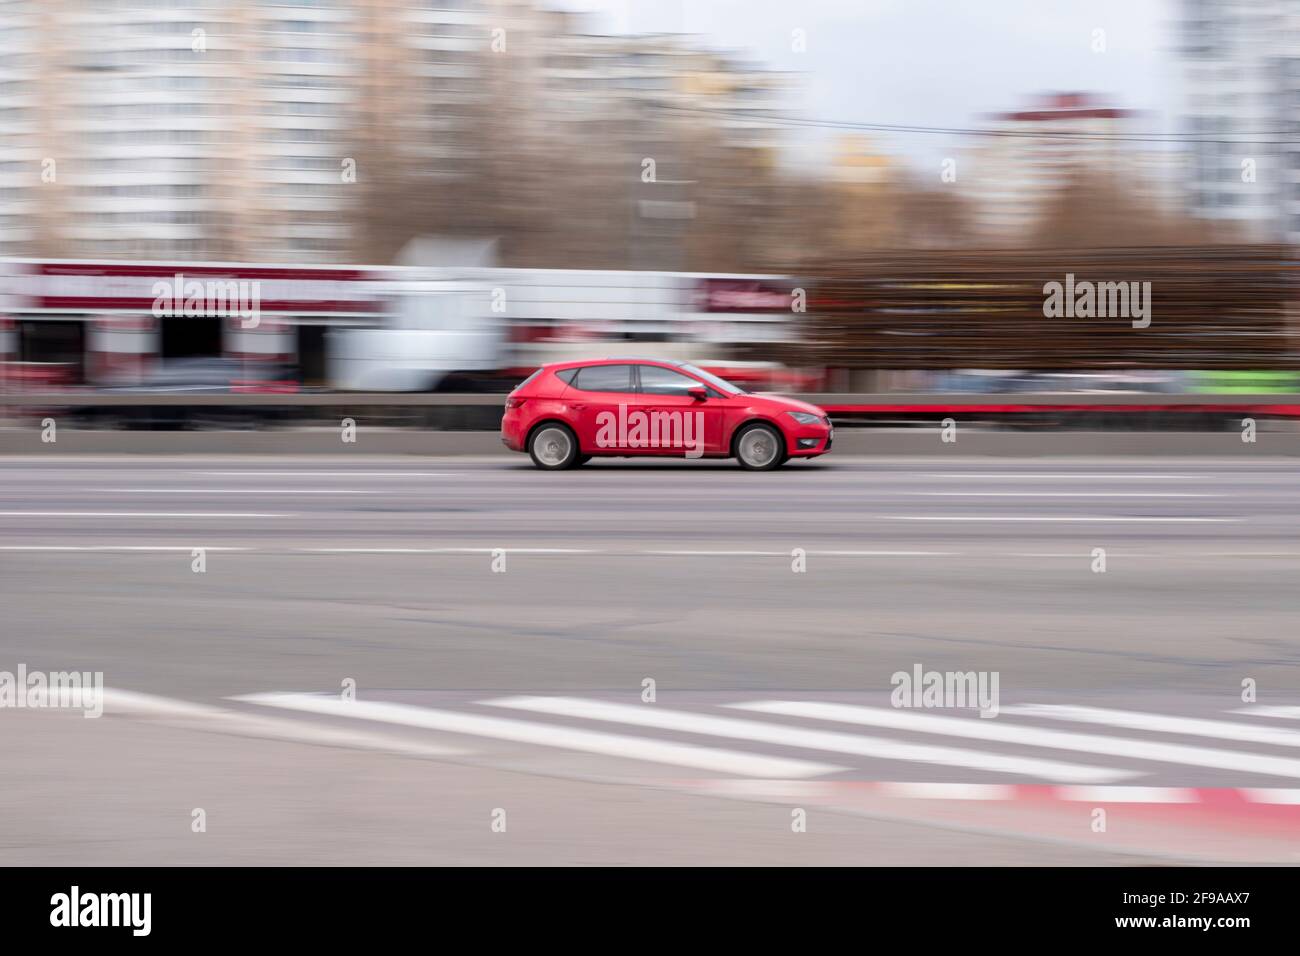 Ukraine, Kyiv - 18 March 2021: Red Seat Leon car moving on the street. Editorial Stock Photo